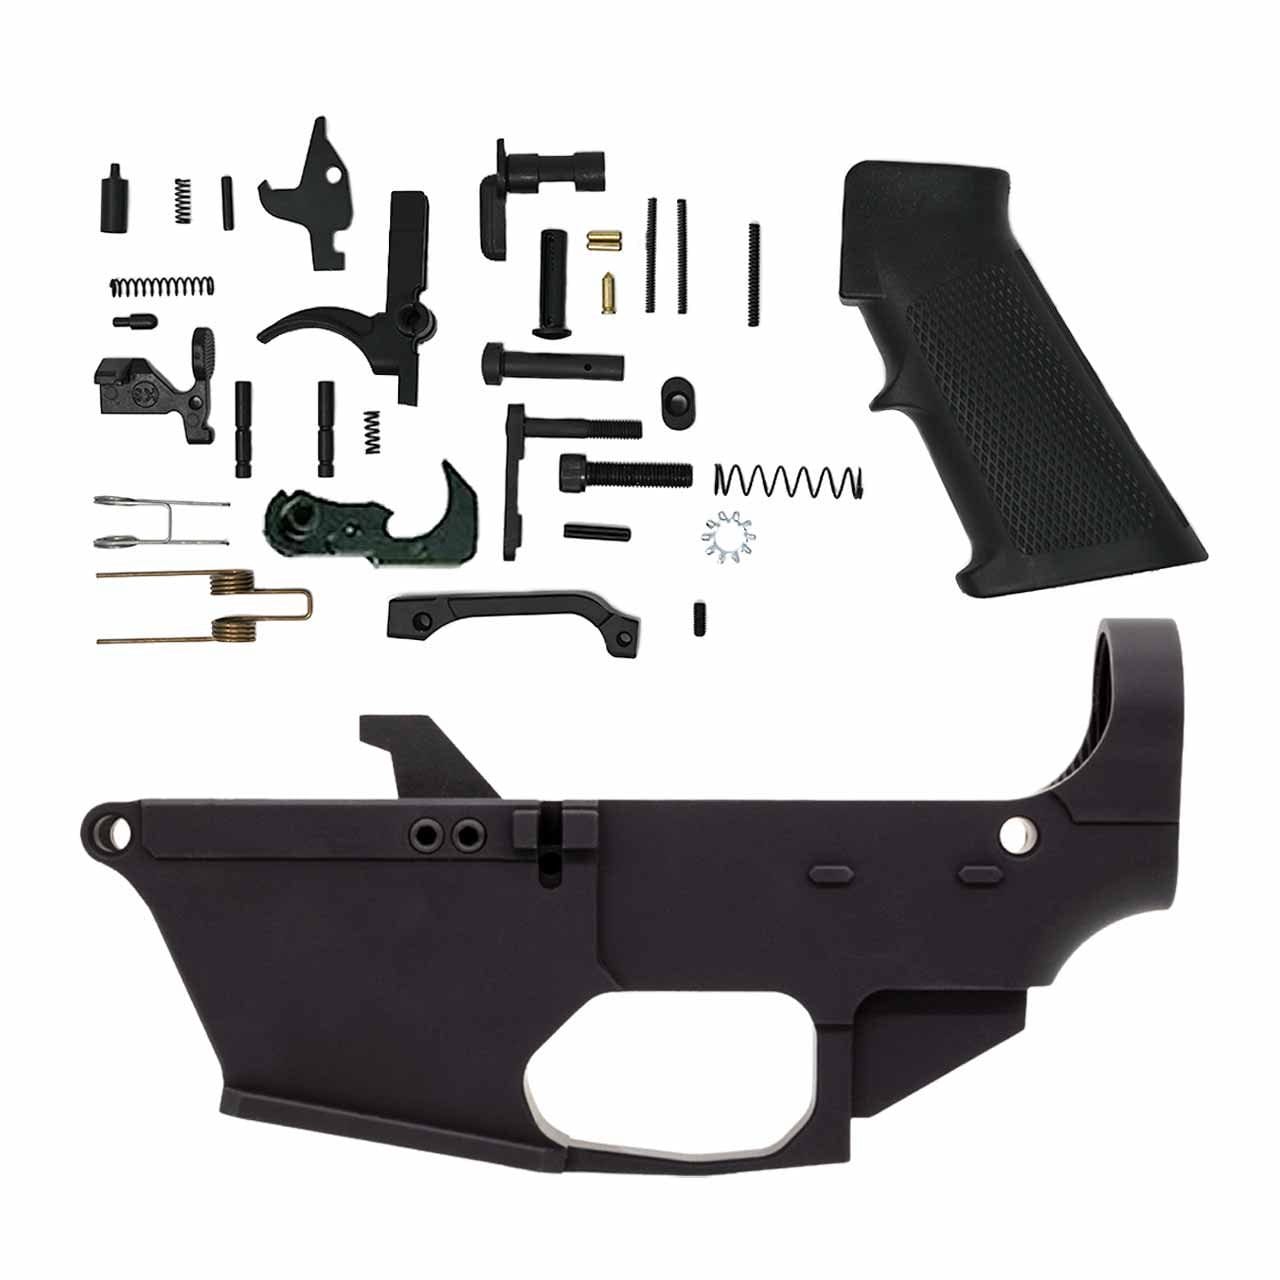 Image of AR9 80% Lower and Mil-Spec AR15 Lower Parts Kit (w/ Hammer and Trigger)